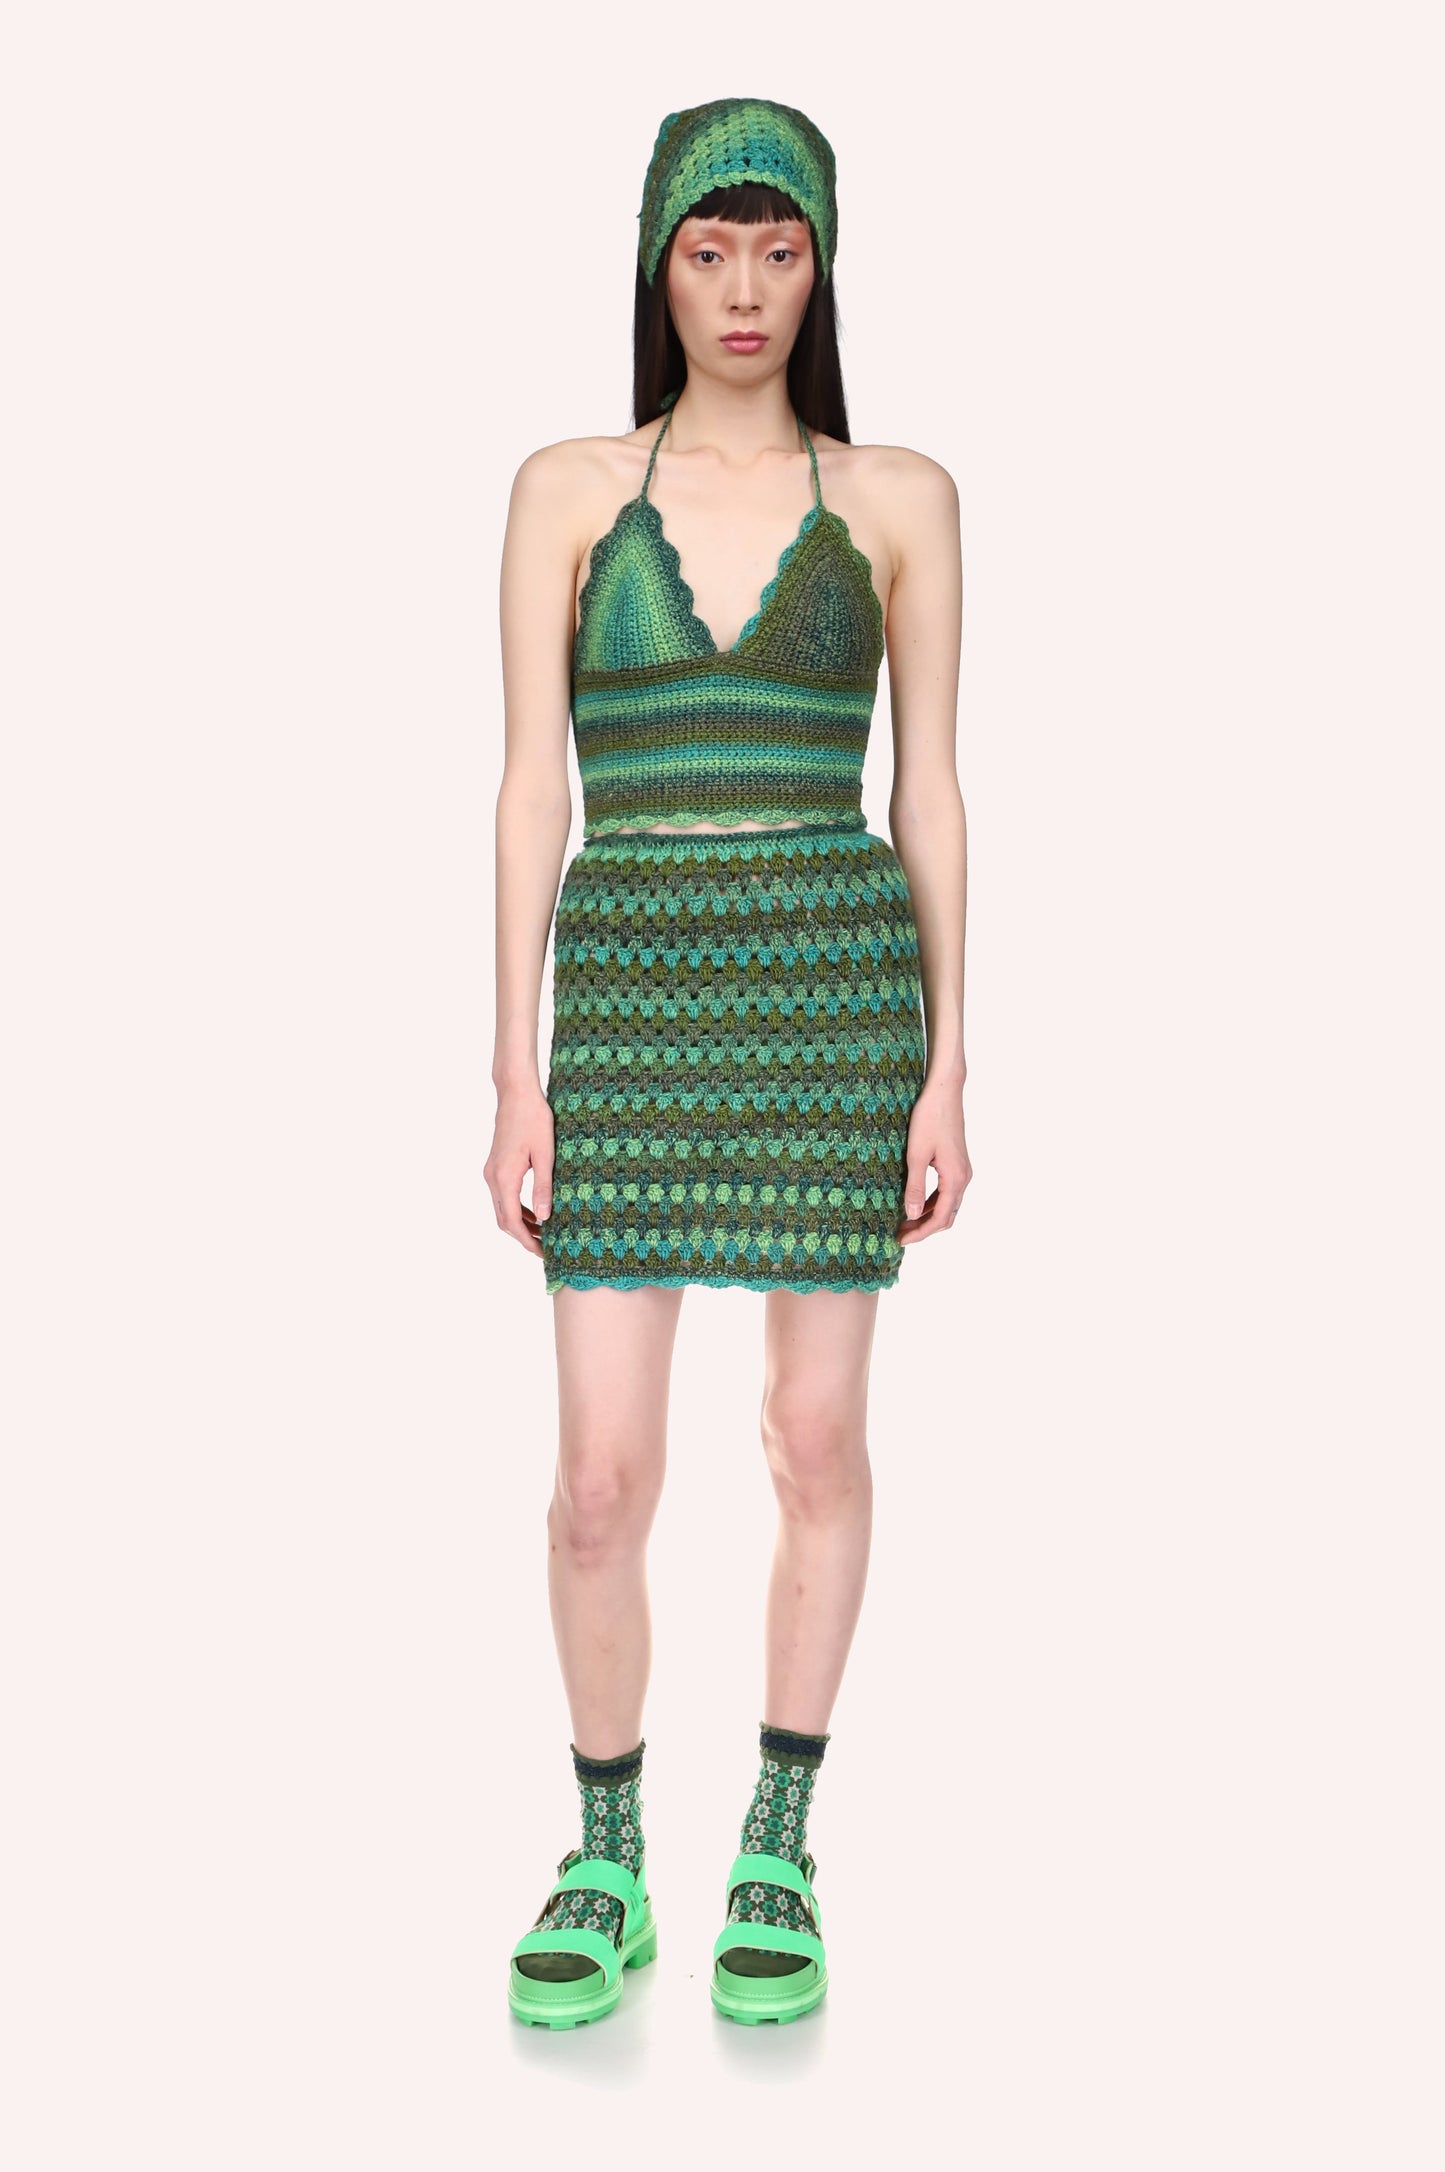 Ombre Hand Crochet Skirt by Konry K Jungle Green, can be worn with any green Anna Sui attire